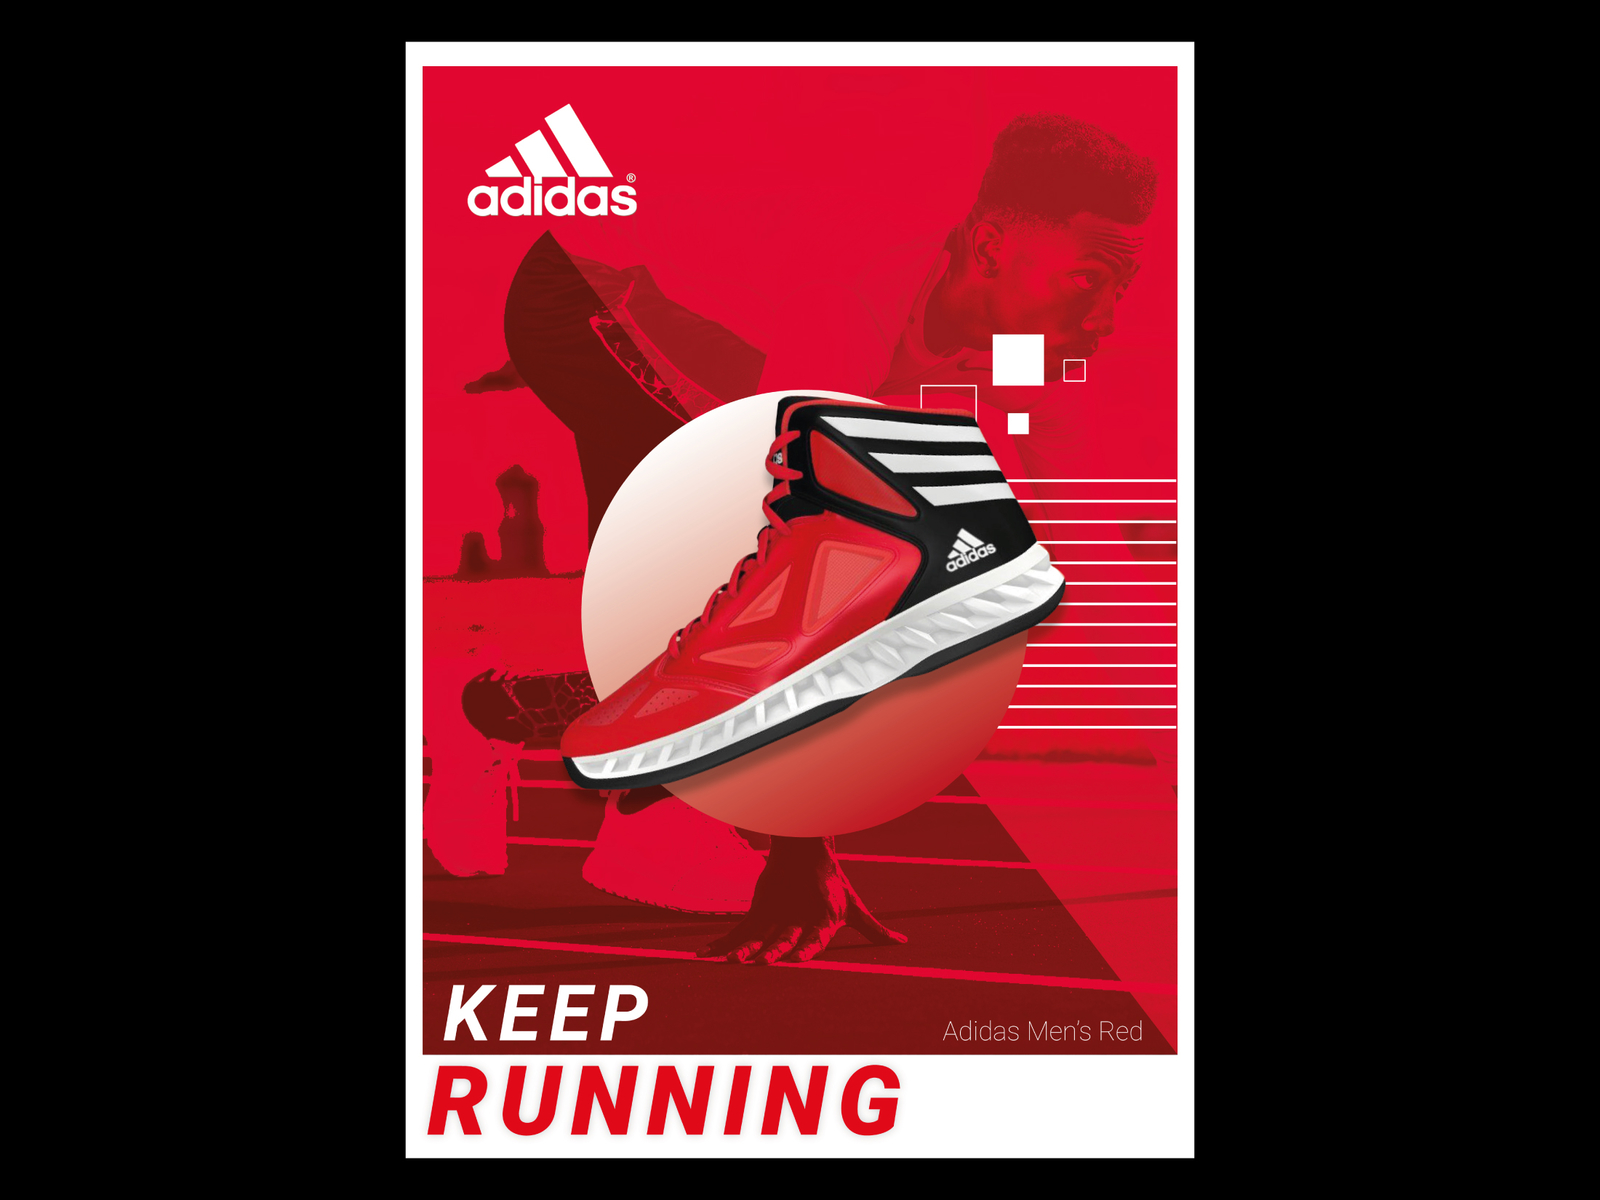 Adidas Poster Design - Just Practice by Akib Mogal on Dribbble